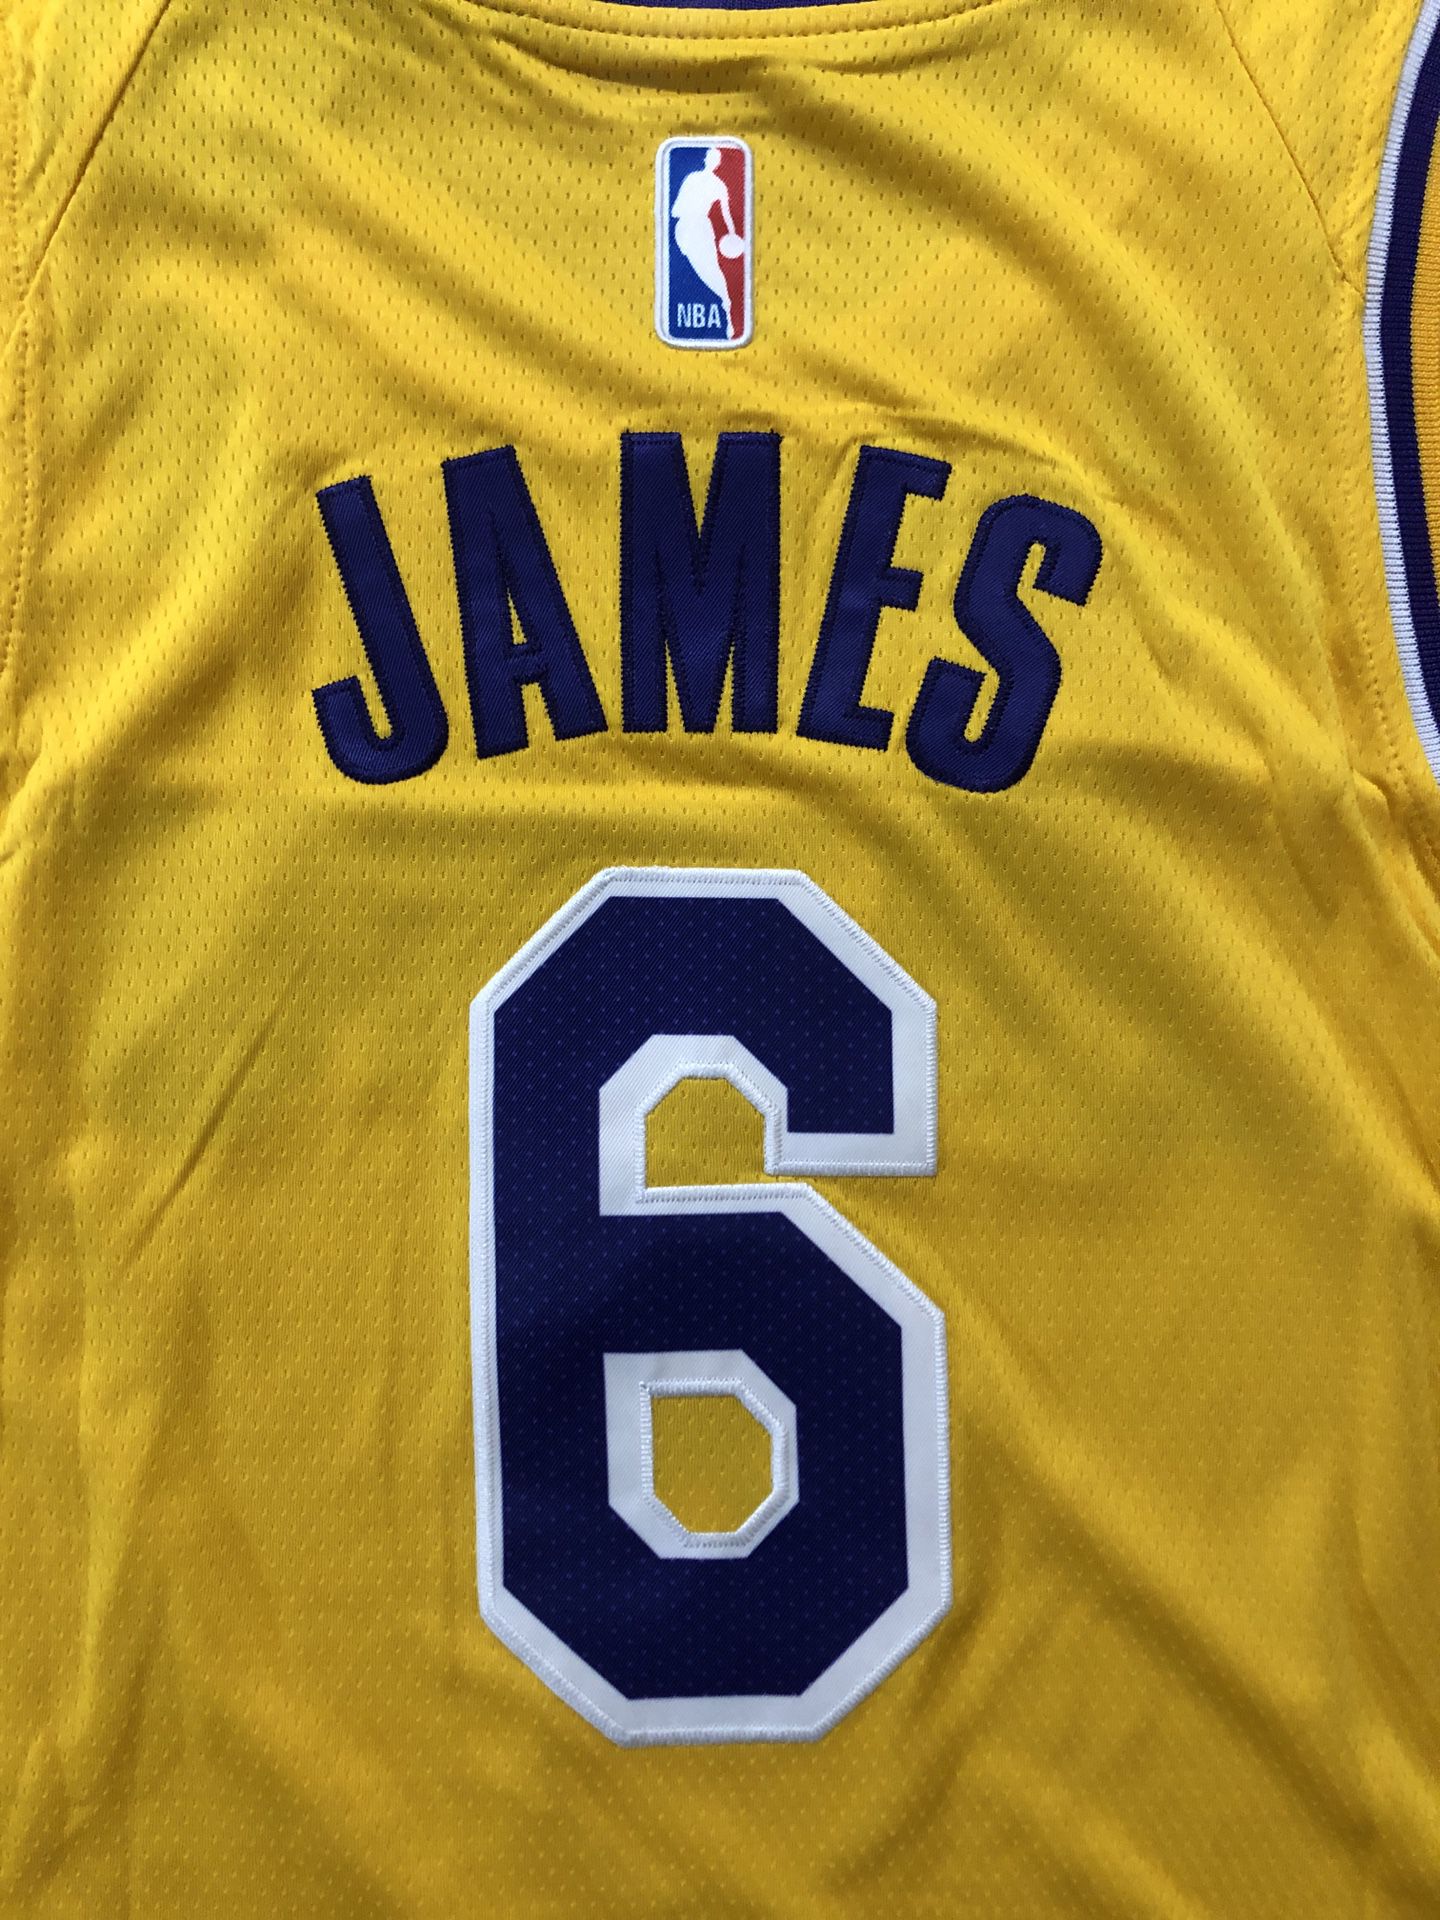 Los Angeles Lakers #6 Lebron James NBA Basketball Jersey - S.M.L.XL.2X.3X  for Sale in Crystal City, CA - OfferUp